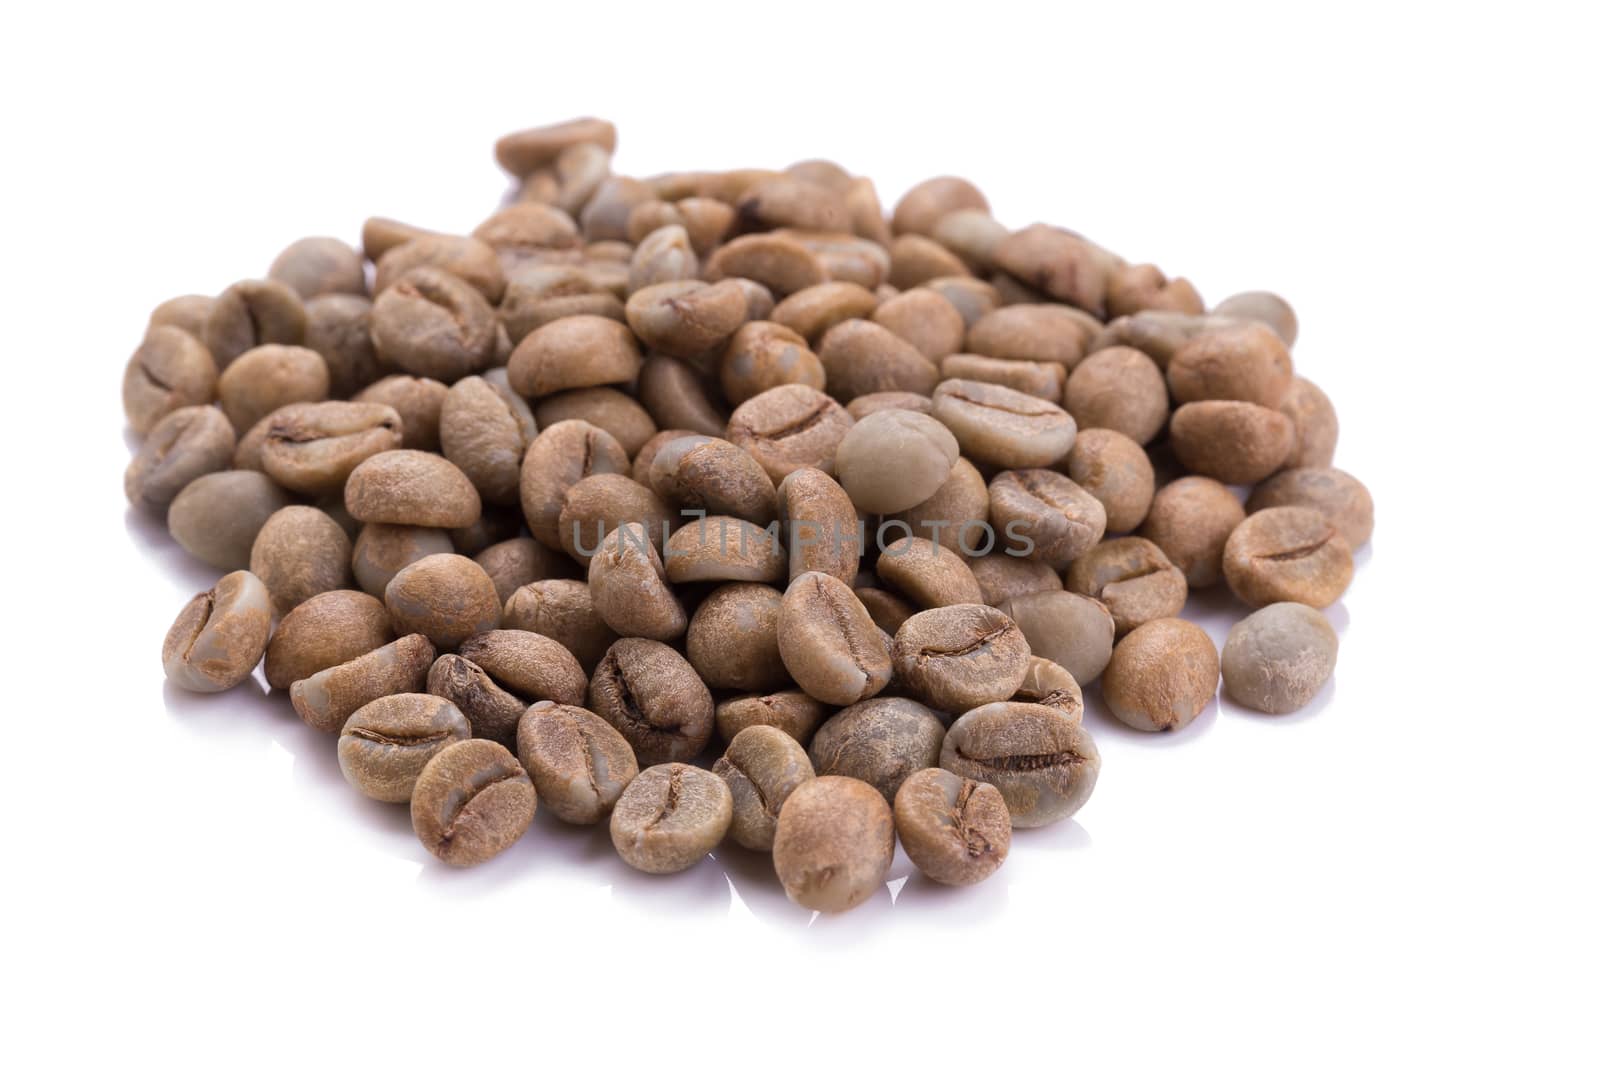 green coffee beans, Unroasted coffee bean, coffee beans ready fo by kaiskynet